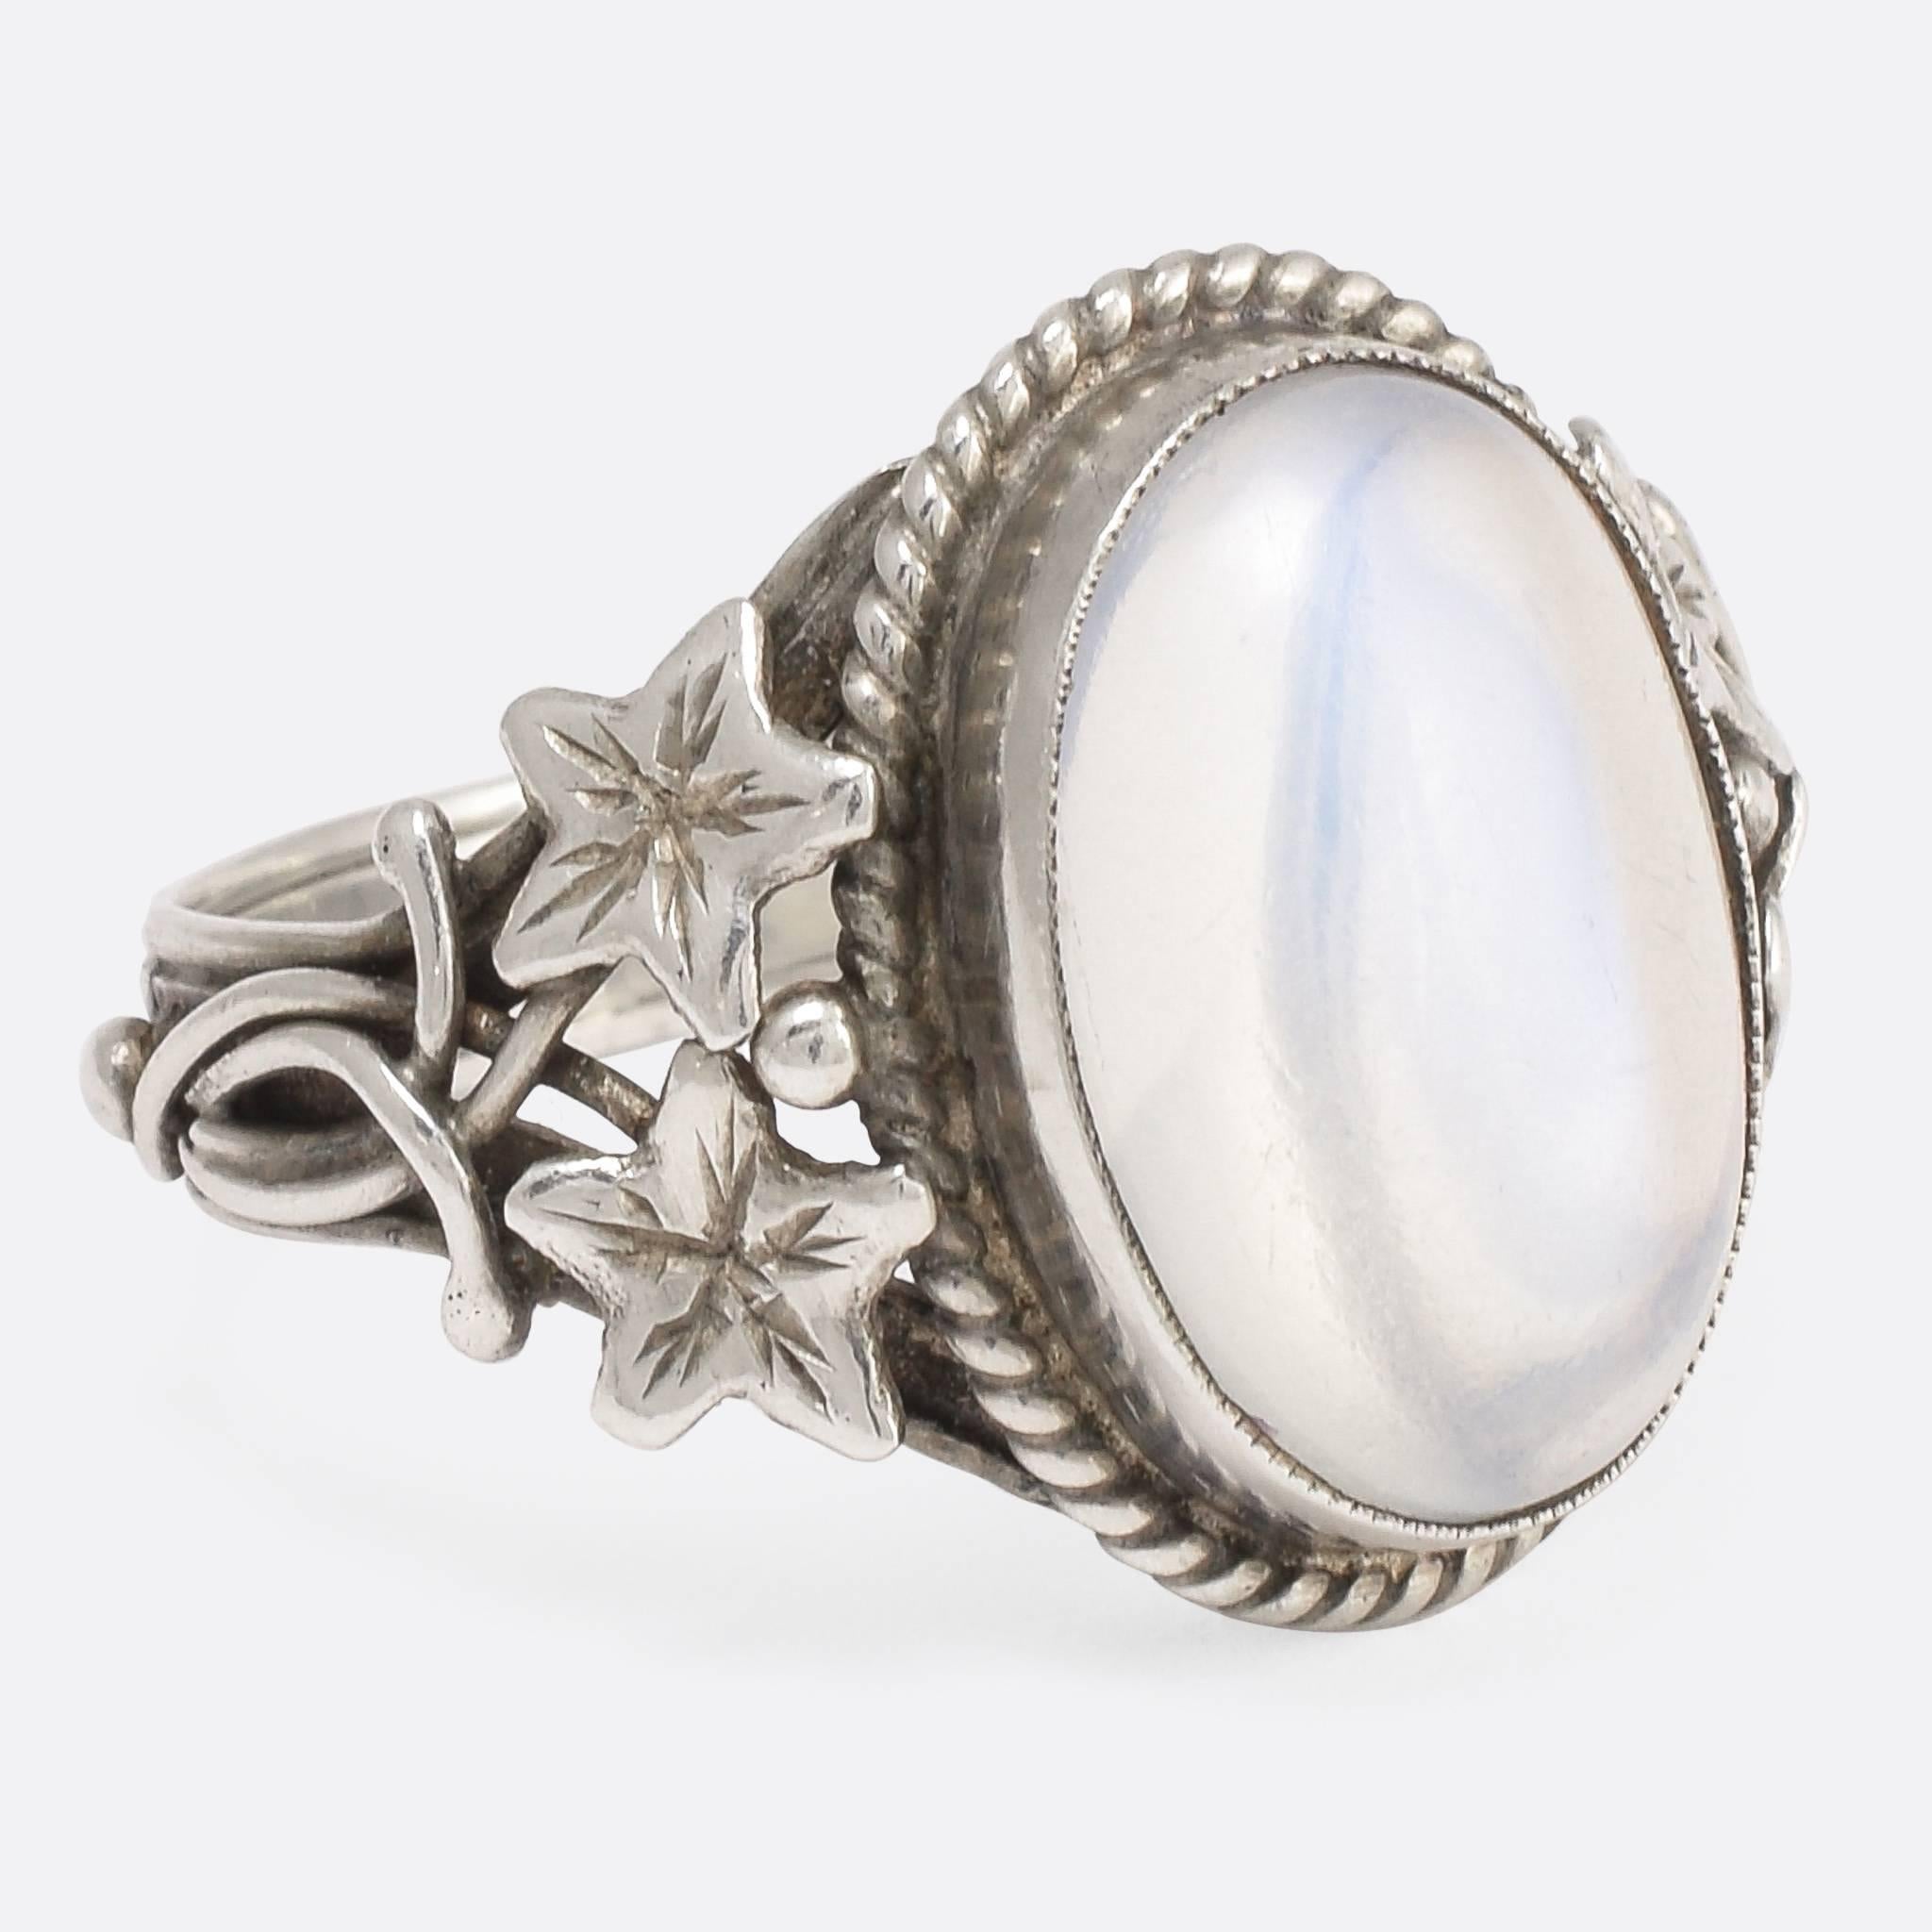 This attractive antique ring was made at the turn of the 20th Century in the Arts & Crafts style. It's modelled in sterling silver and set with a gorgeous oval moonstone cabochon - the shoulders feature delicate openwork foliate designs, and a